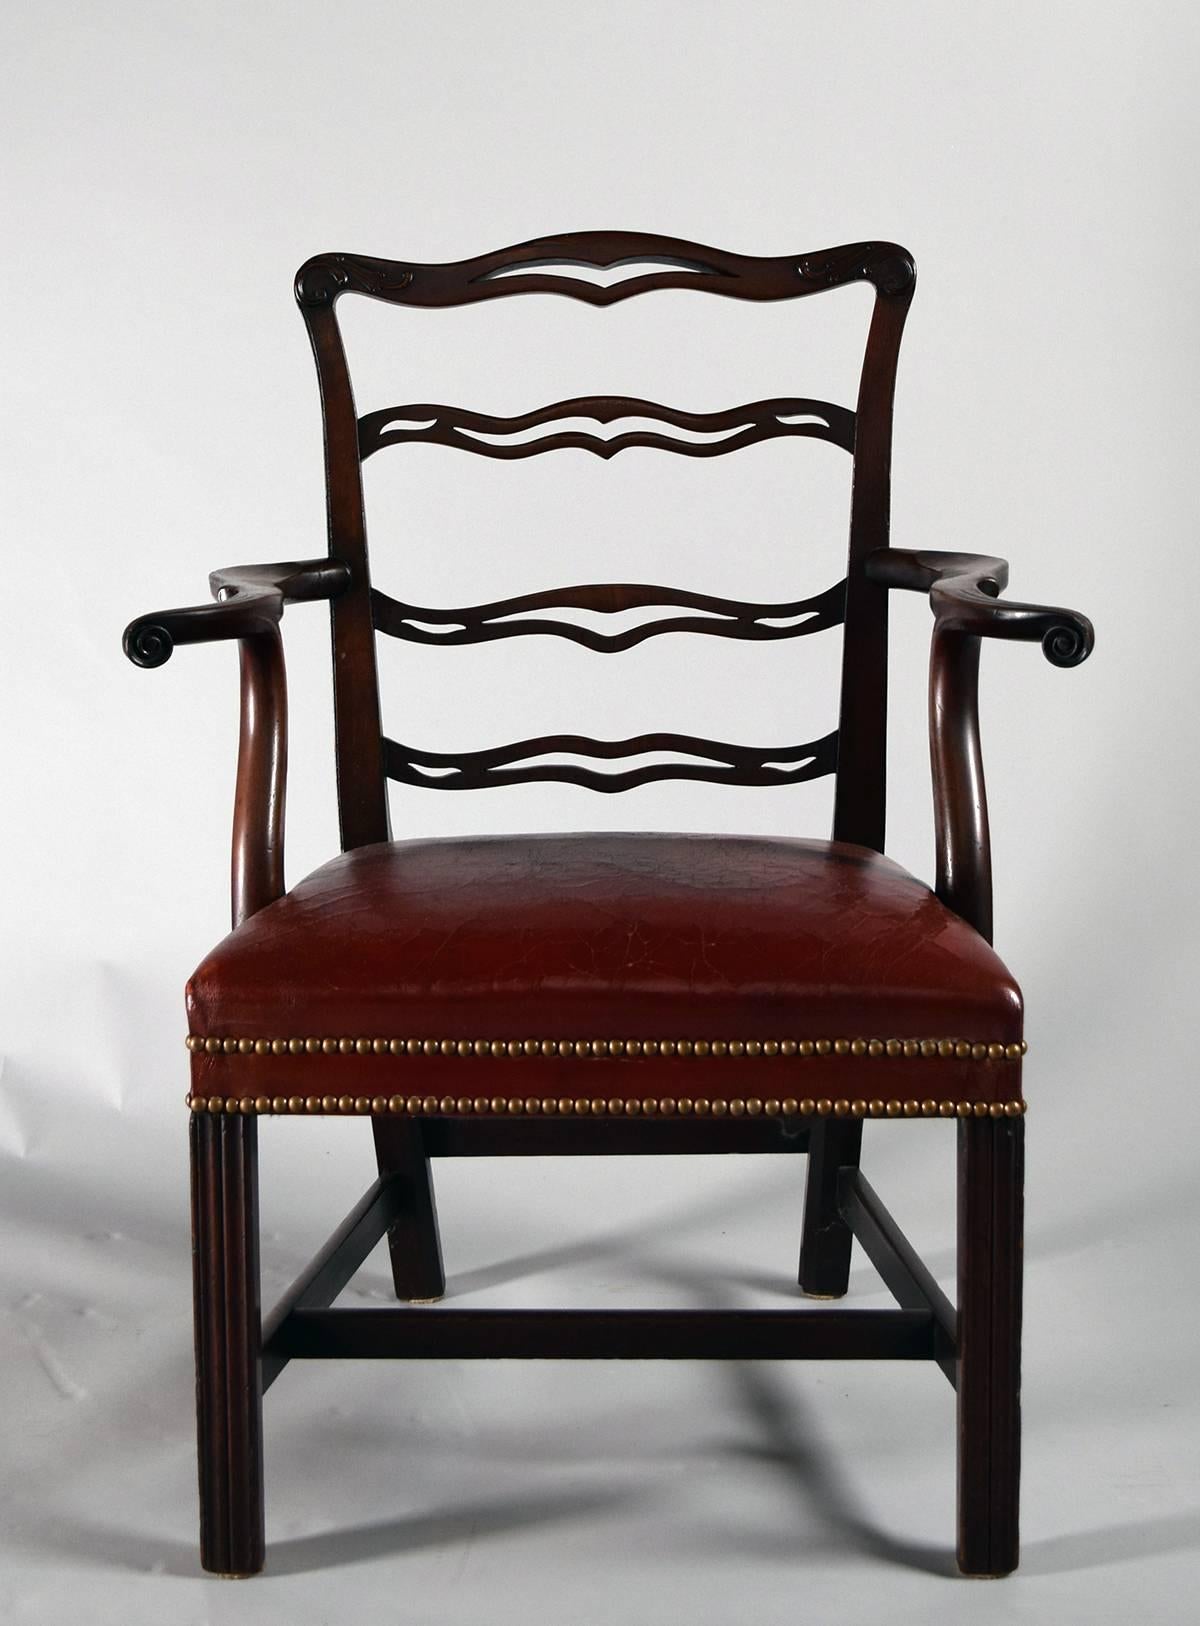 Each with serpentine pierced crestrail above three carved and pierced splats over upholstered seats with shapely armrests flanking, on squared fluted legs joined by stretchers.

Provenance: Roundwood Manor, Hunting Valley, Ohio.